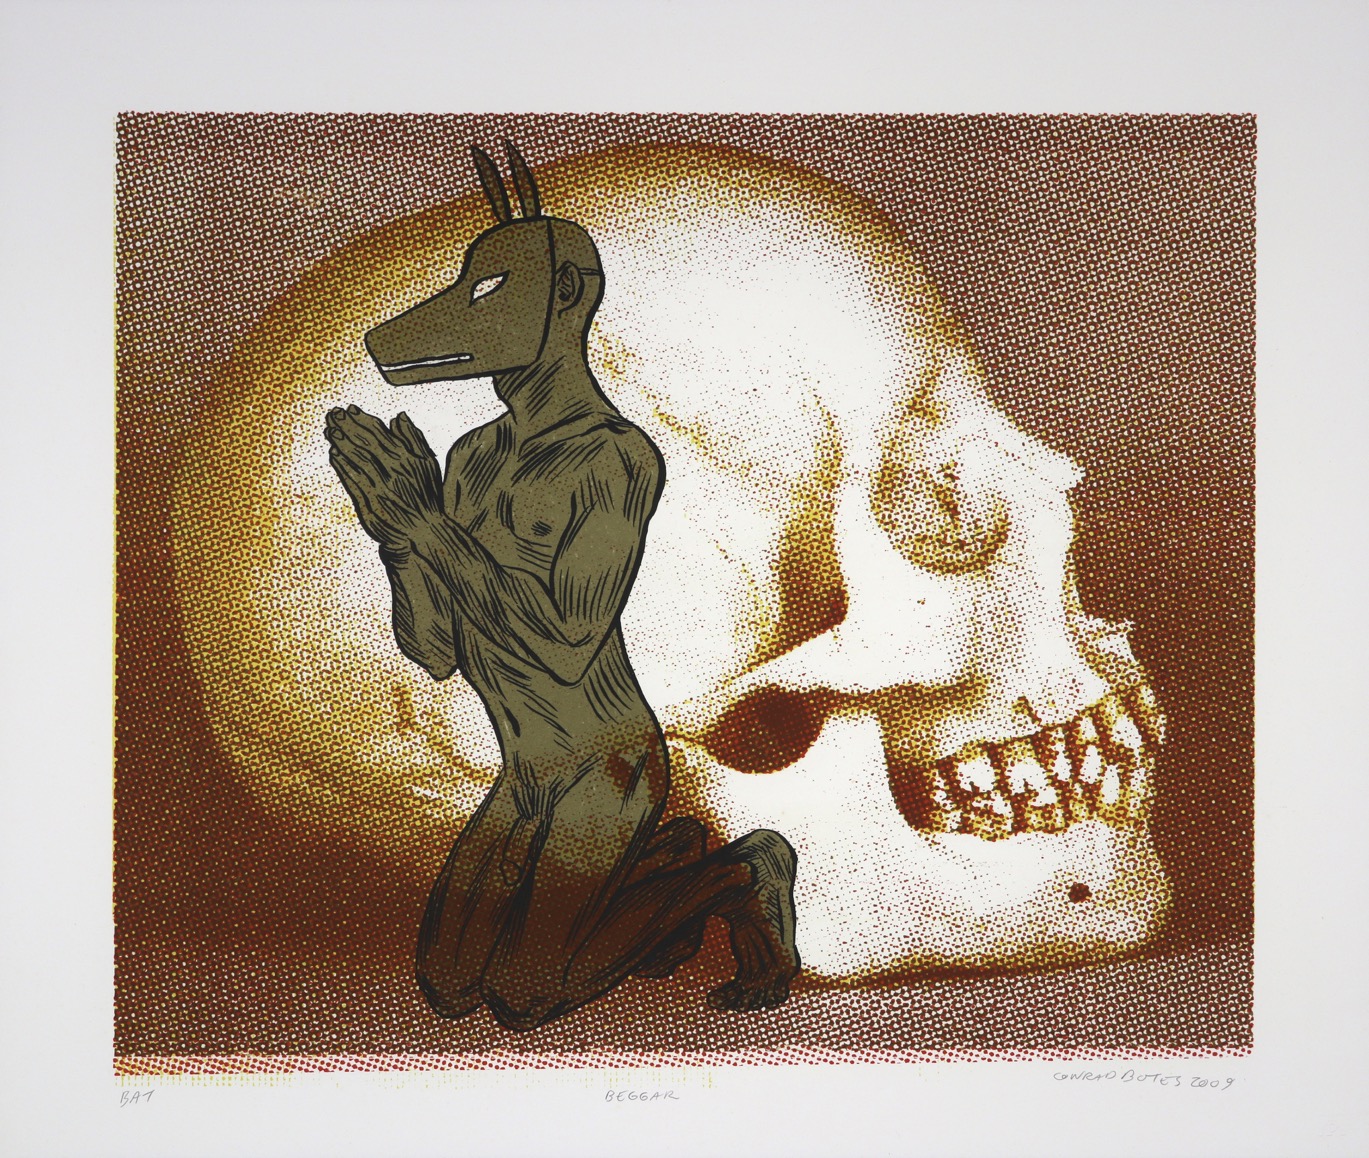 Naked man wearing dog mask kneeling in prayer in front of enlarged photograph of human skull.